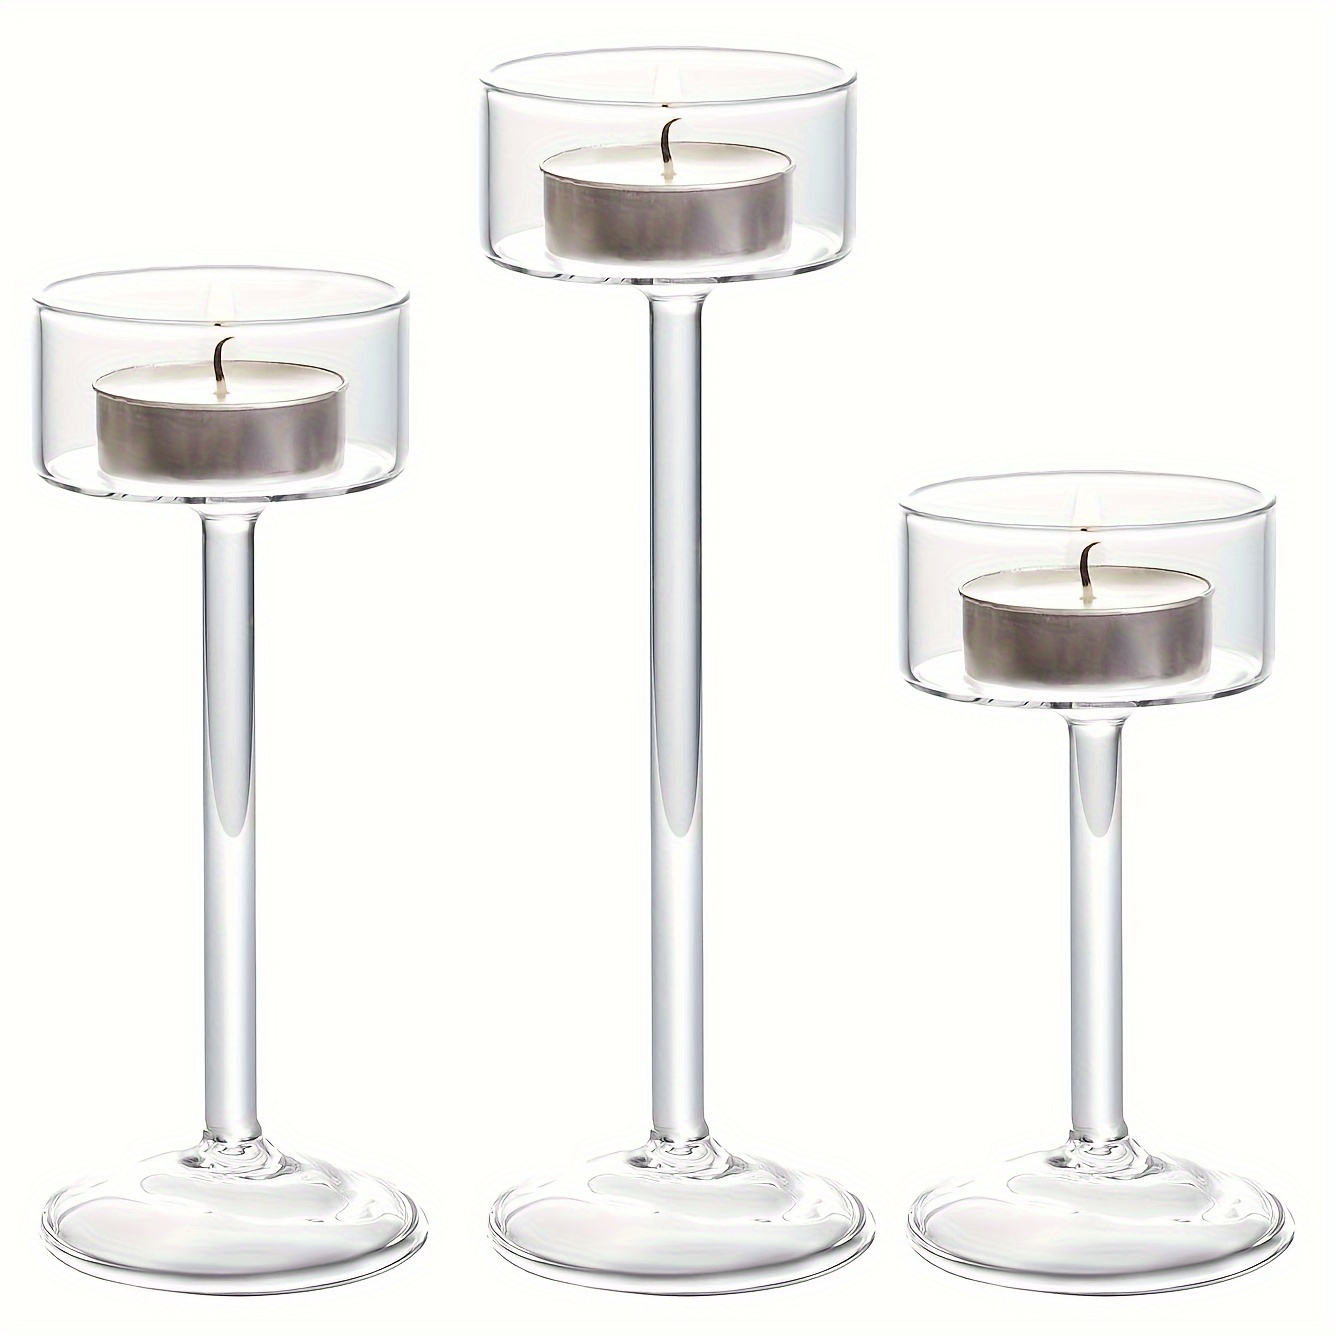 

3pcs, Elegant Glass Candle Holder Set, Borosilicate Tealight Holders, For Dining Table Centerpiece, Wedding Party & Home Decor